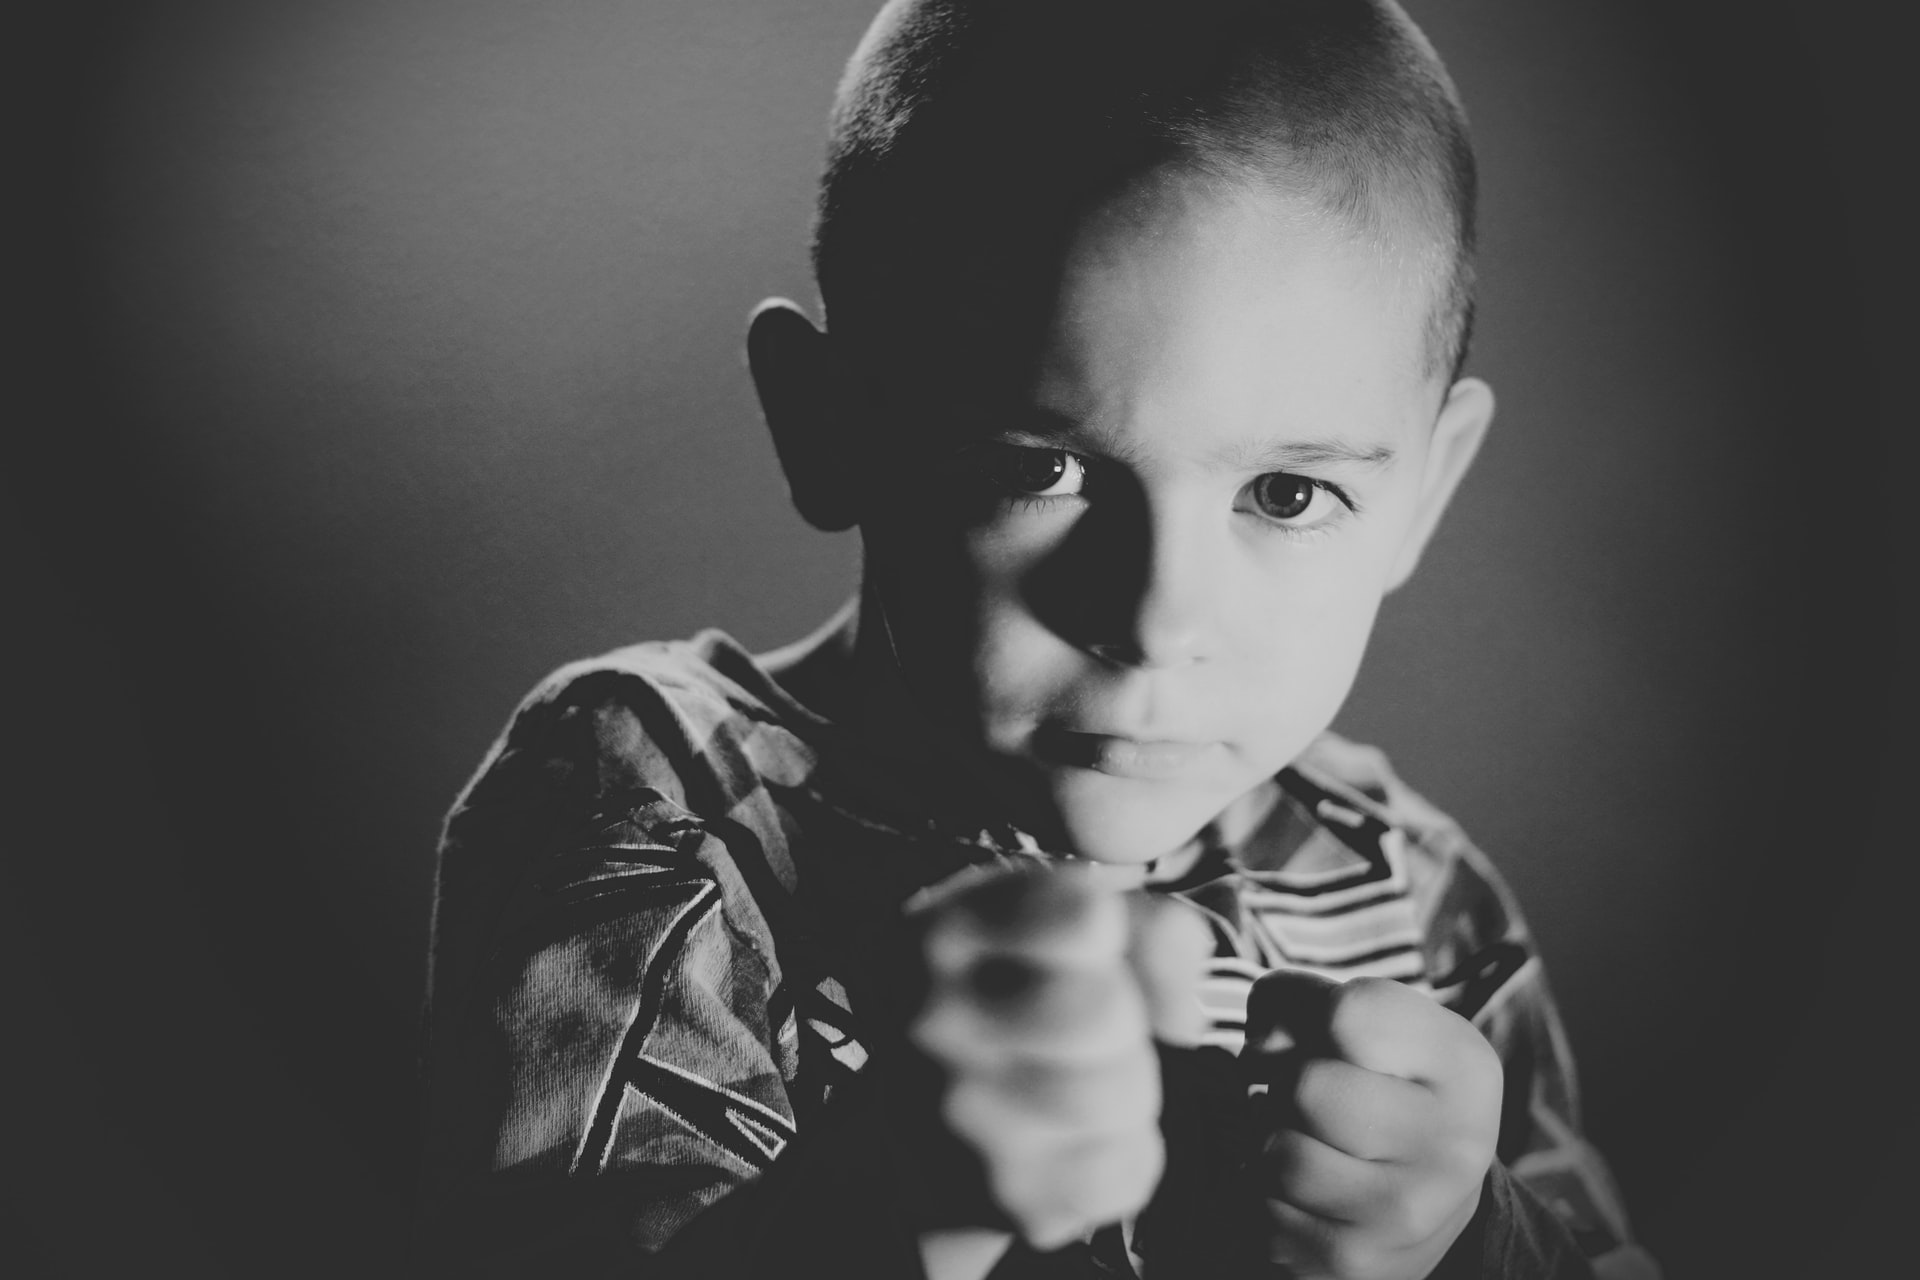 child with fists in defensive posture